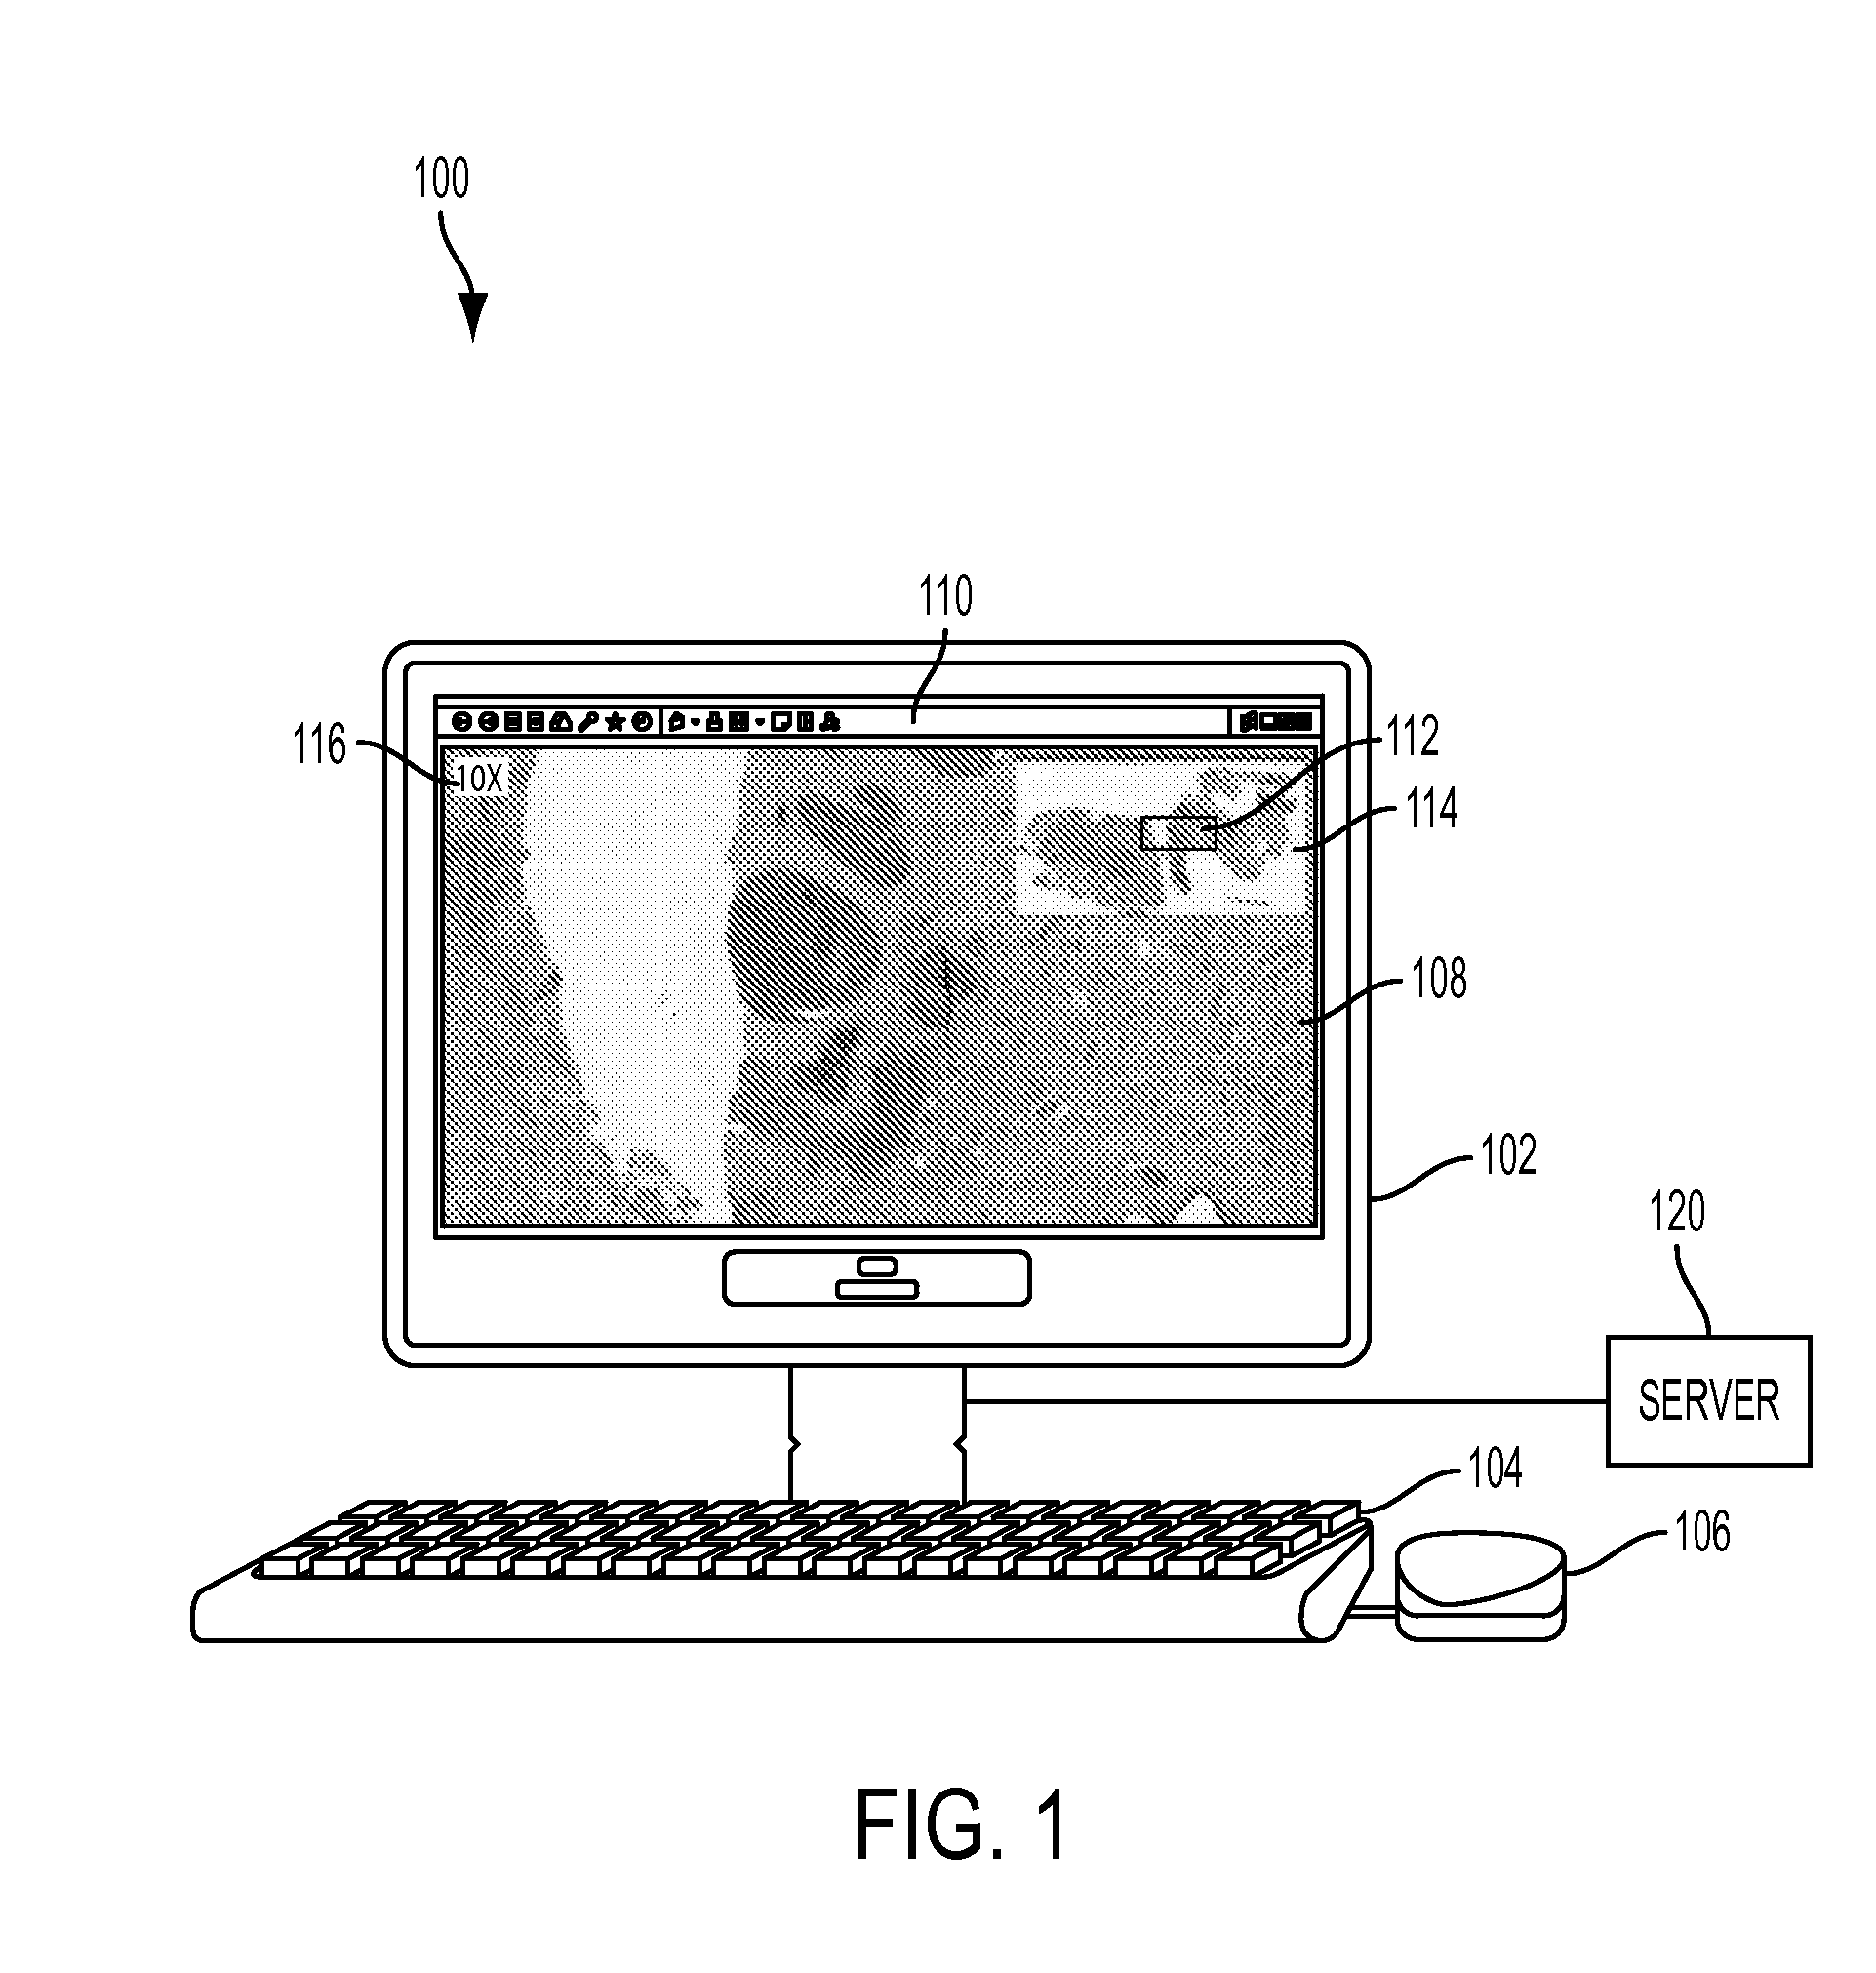 System and Method for Improved Viewing and Navigation of Digital Images